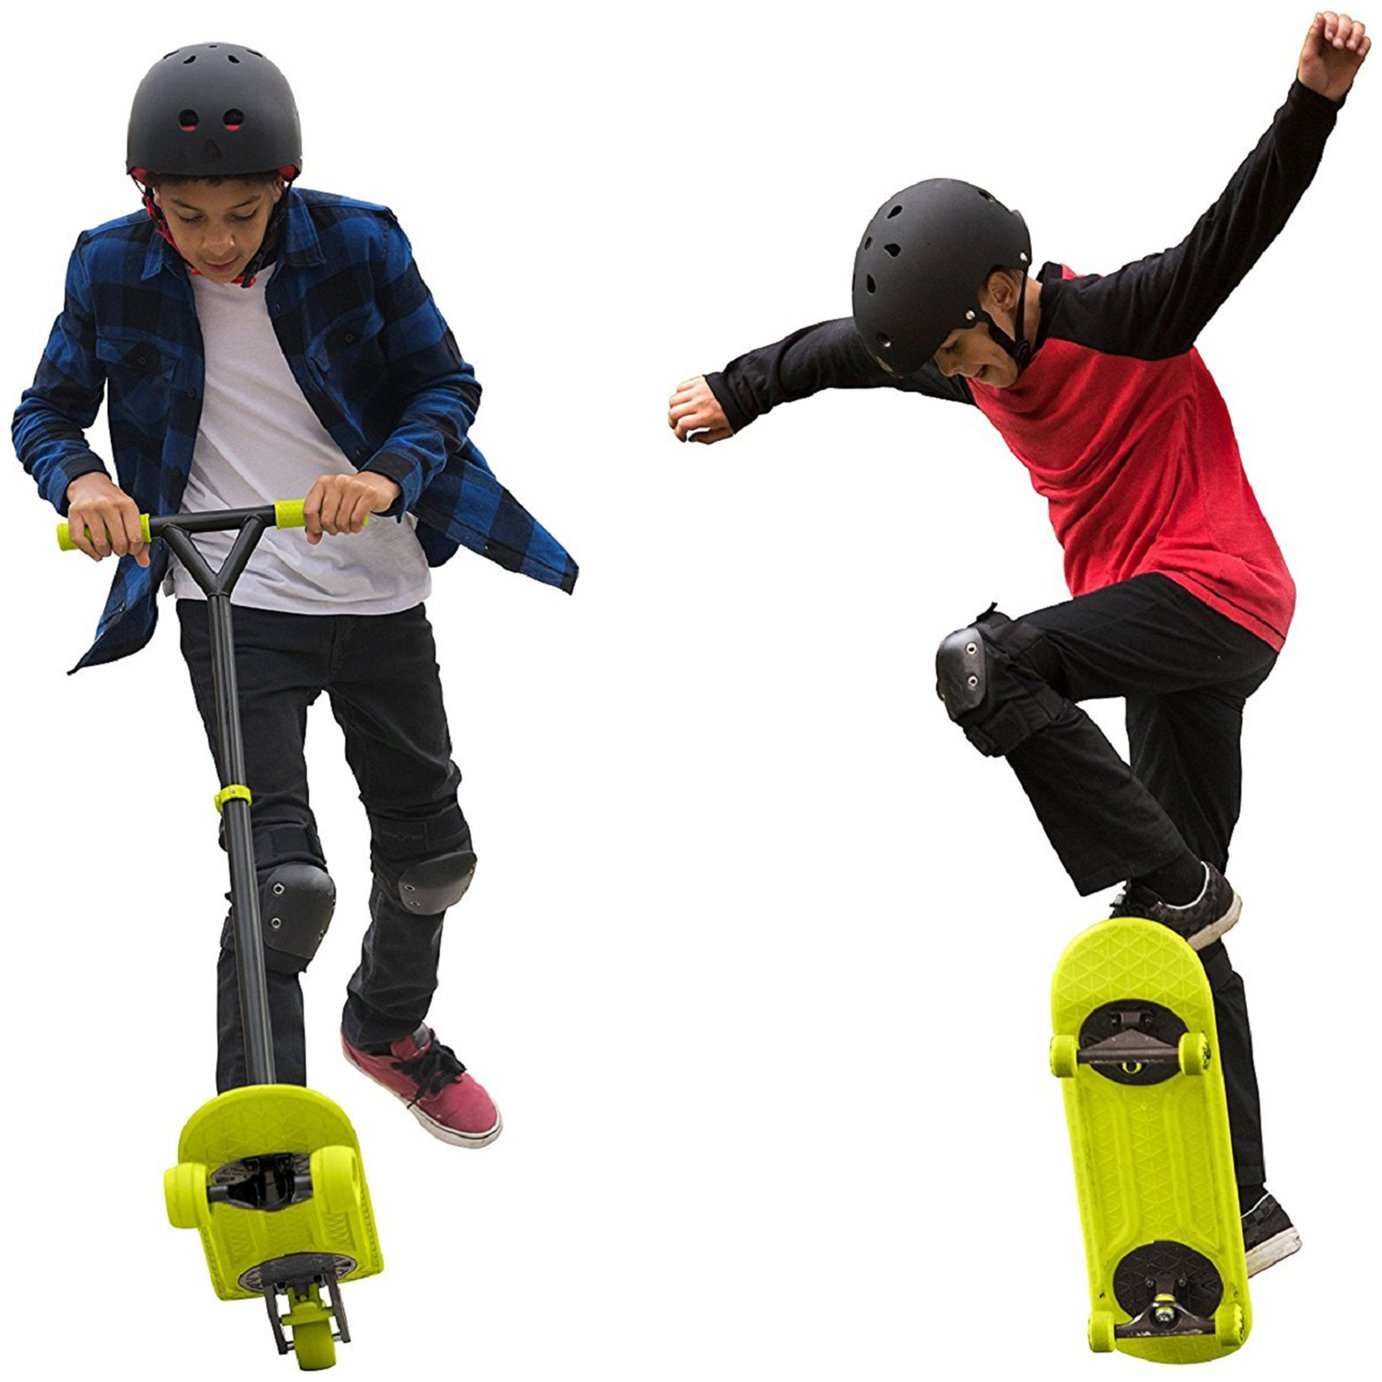 Morfboard Skate and Scoot Combo Set Review